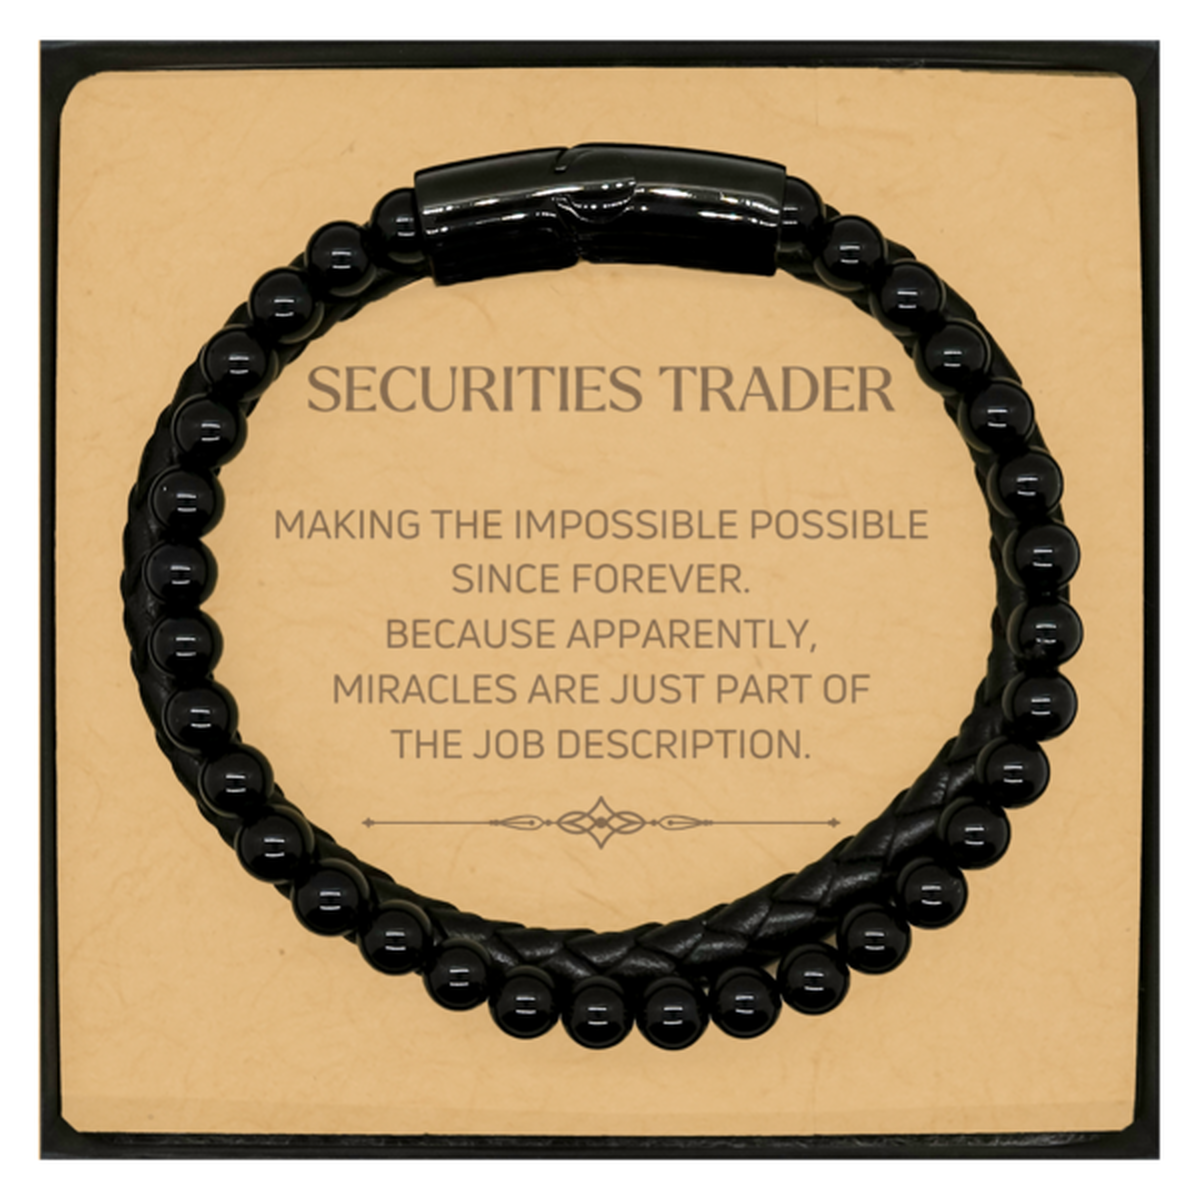 Funny Securities Trader Gifts, Miracles are just part of the job description, Inspirational Birthday Christmas Stone Leather Bracelets For Securities Trader, Men, Women, Coworkers, Friends, Boss